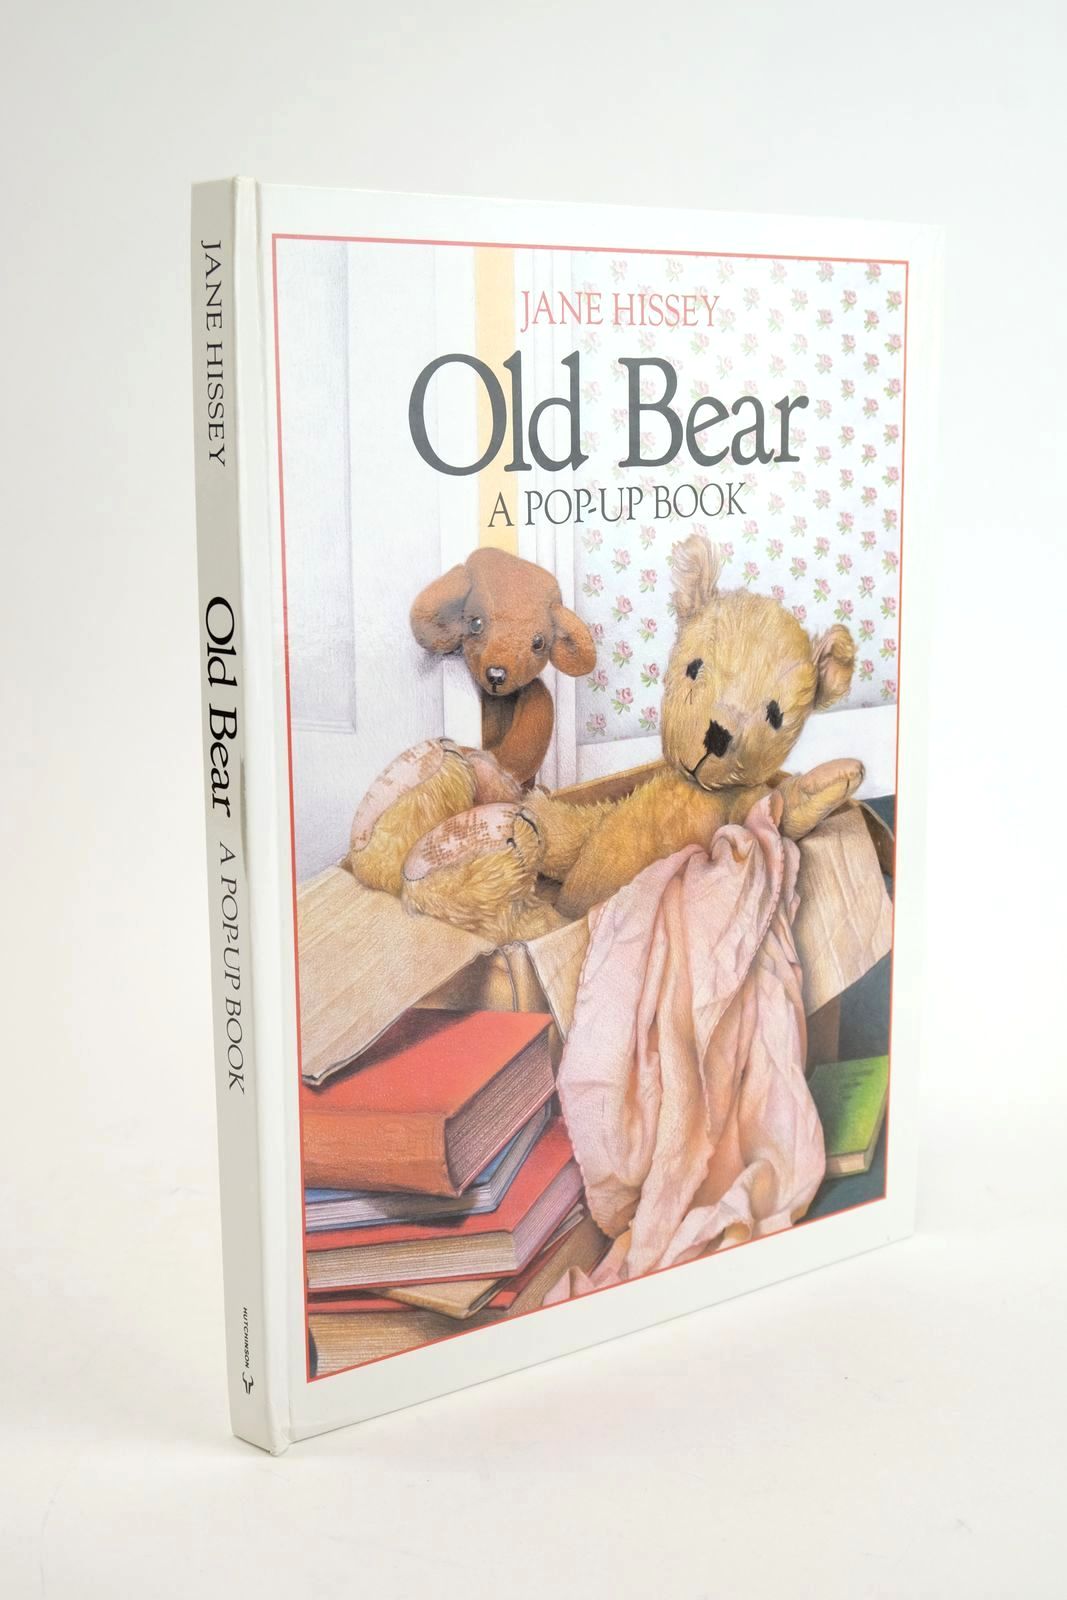 Photo of OLD BEAR A POP-UP BOOK written by Hissey, Jane illustrated by Hissey, Jane published by Hutchinson Children's Books (STOCK CODE: 1323647)  for sale by Stella & Rose's Books